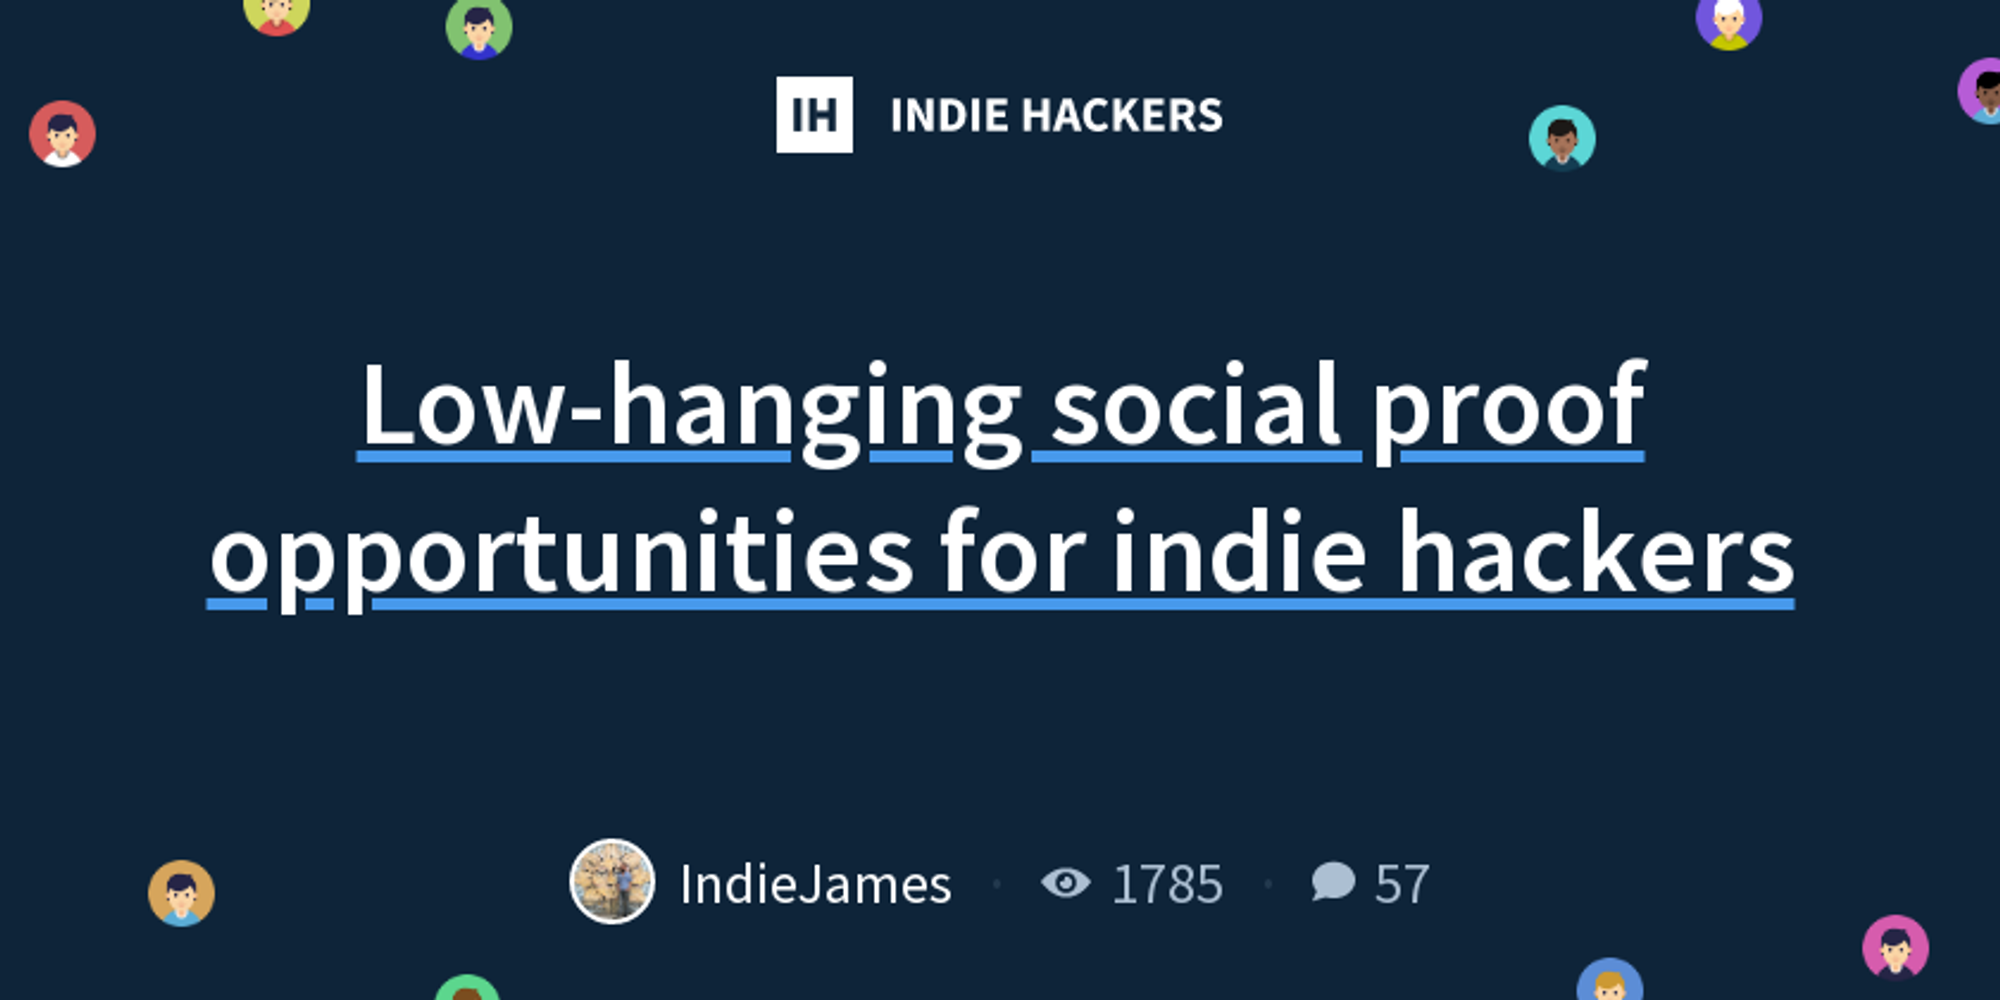 Low-hanging social proof opportunities for indie hackers